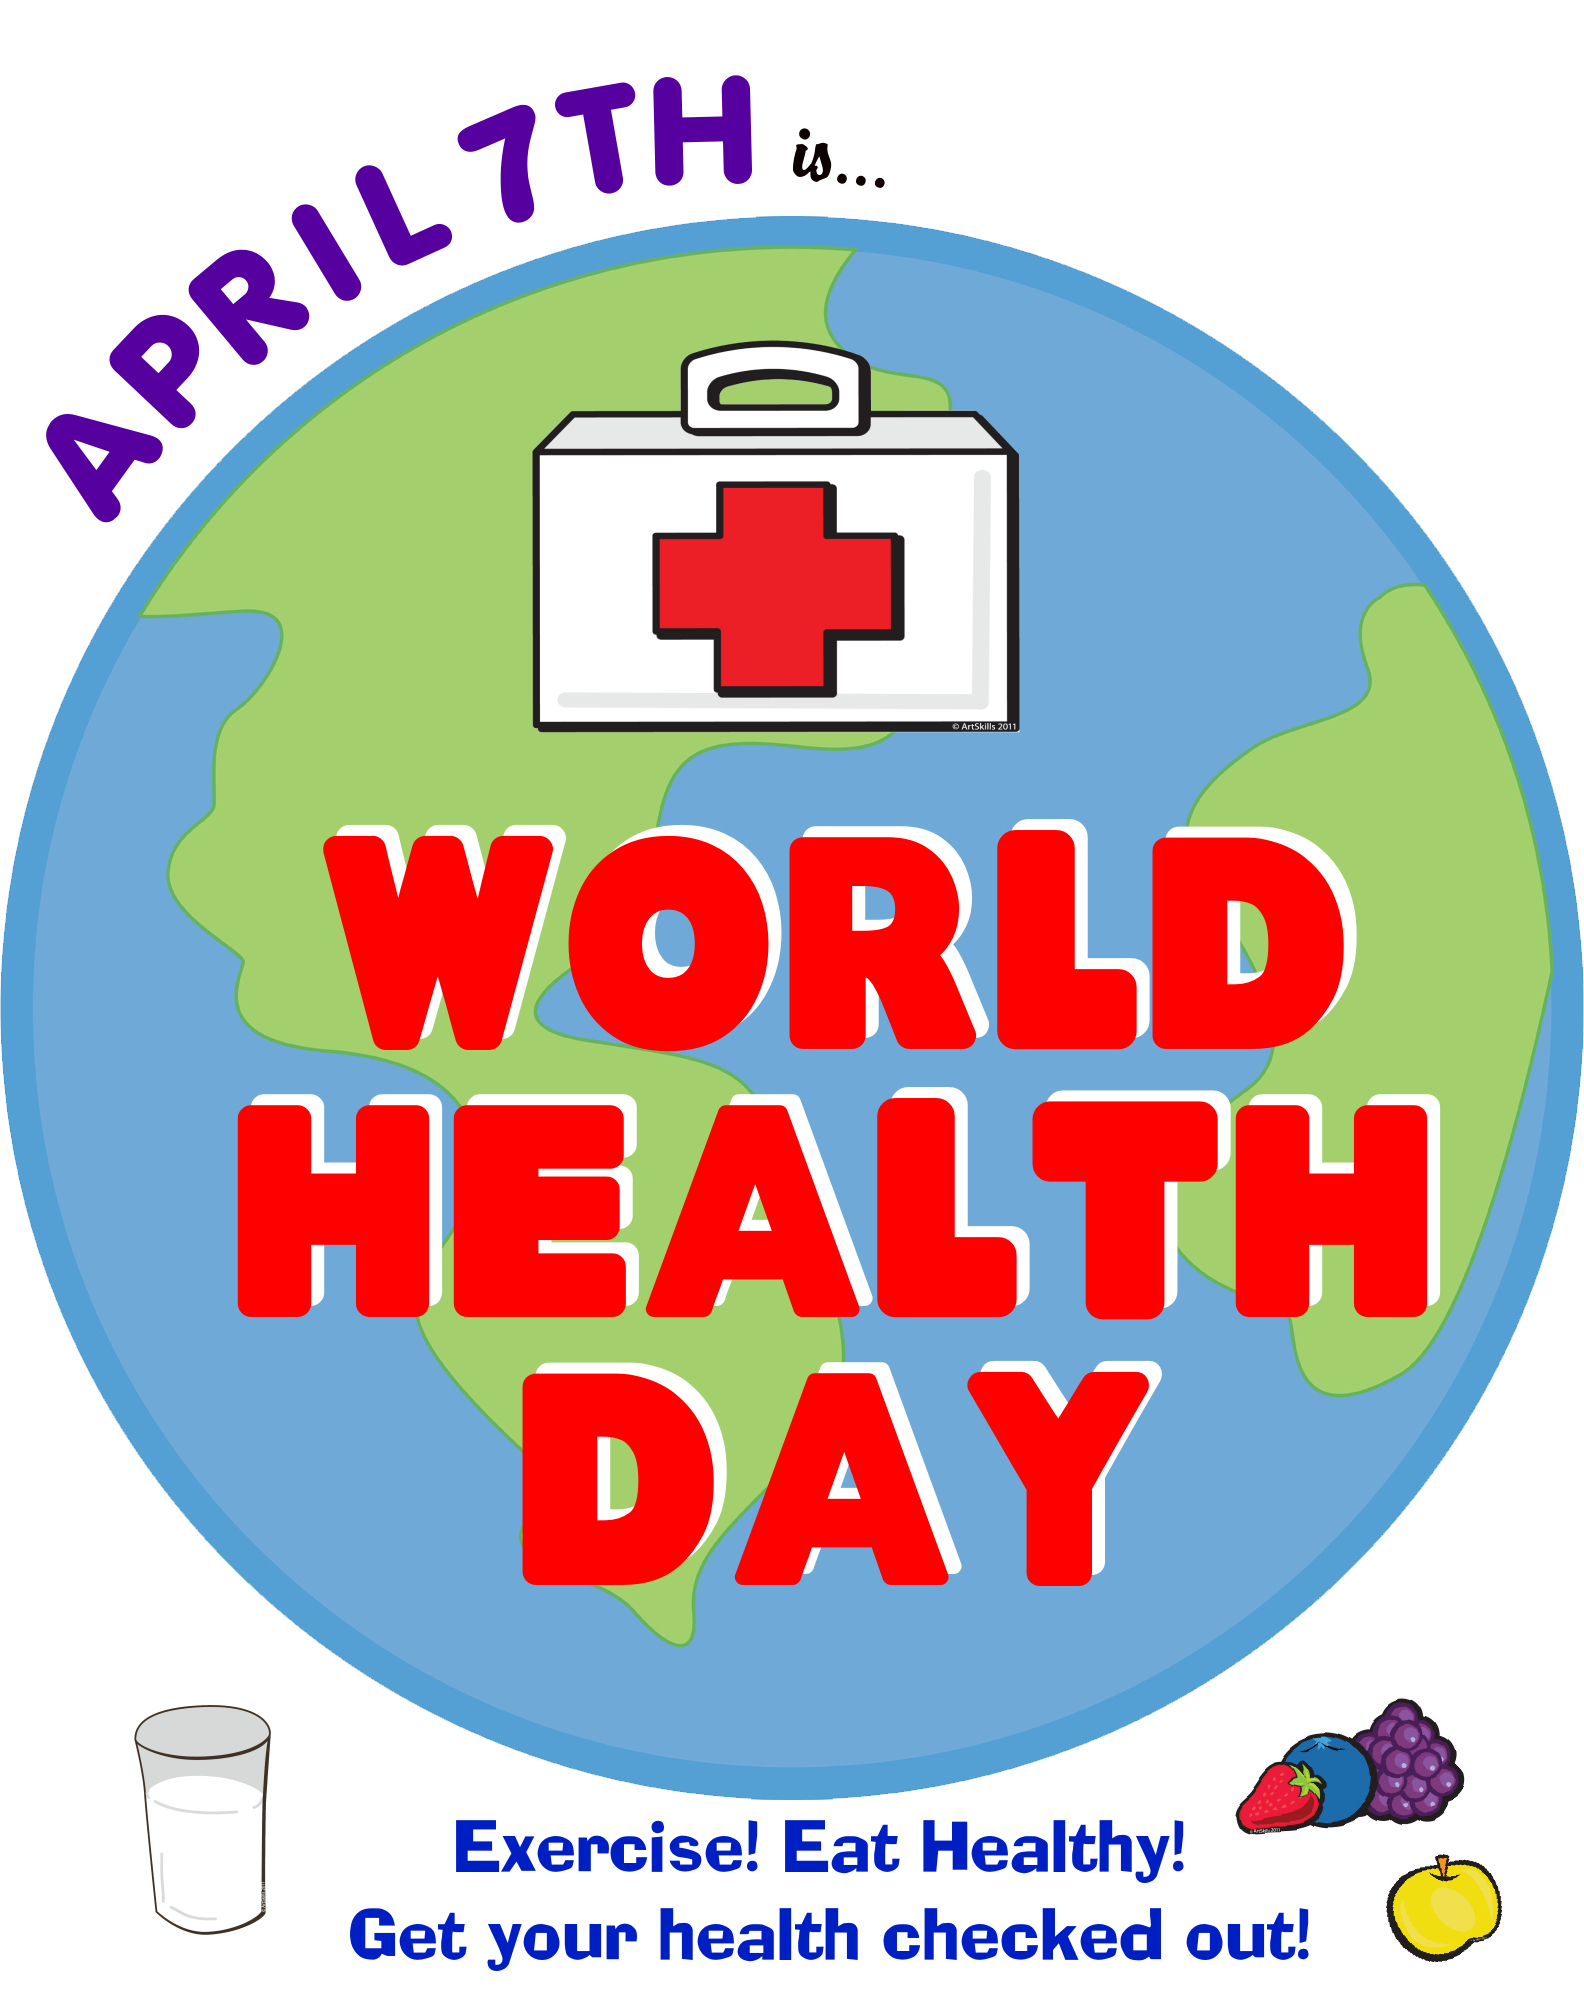 april 7th is world health day exercise eat healthy